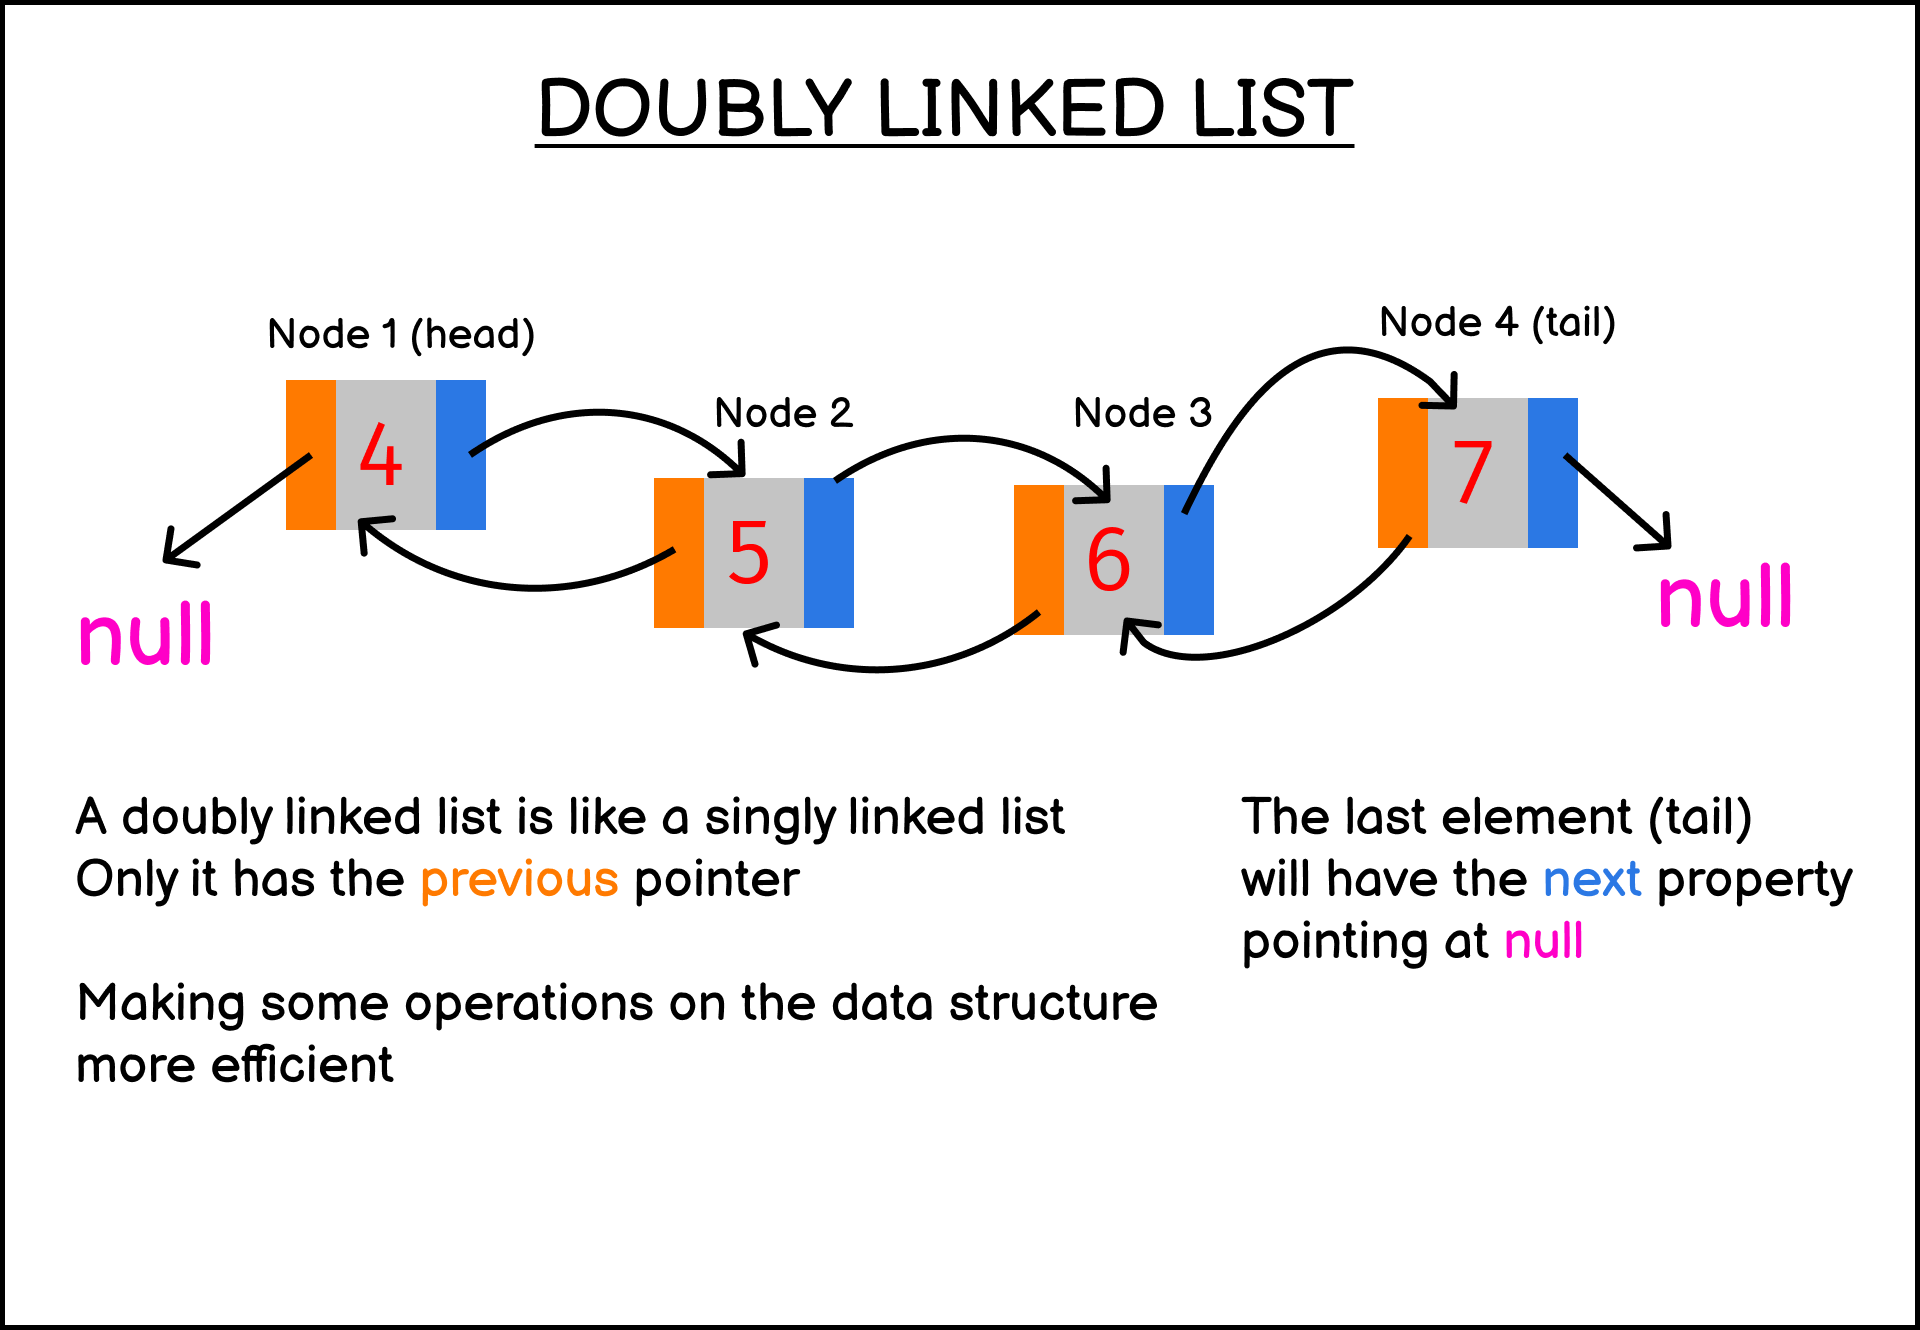 Doubly linked list data structure illustrated